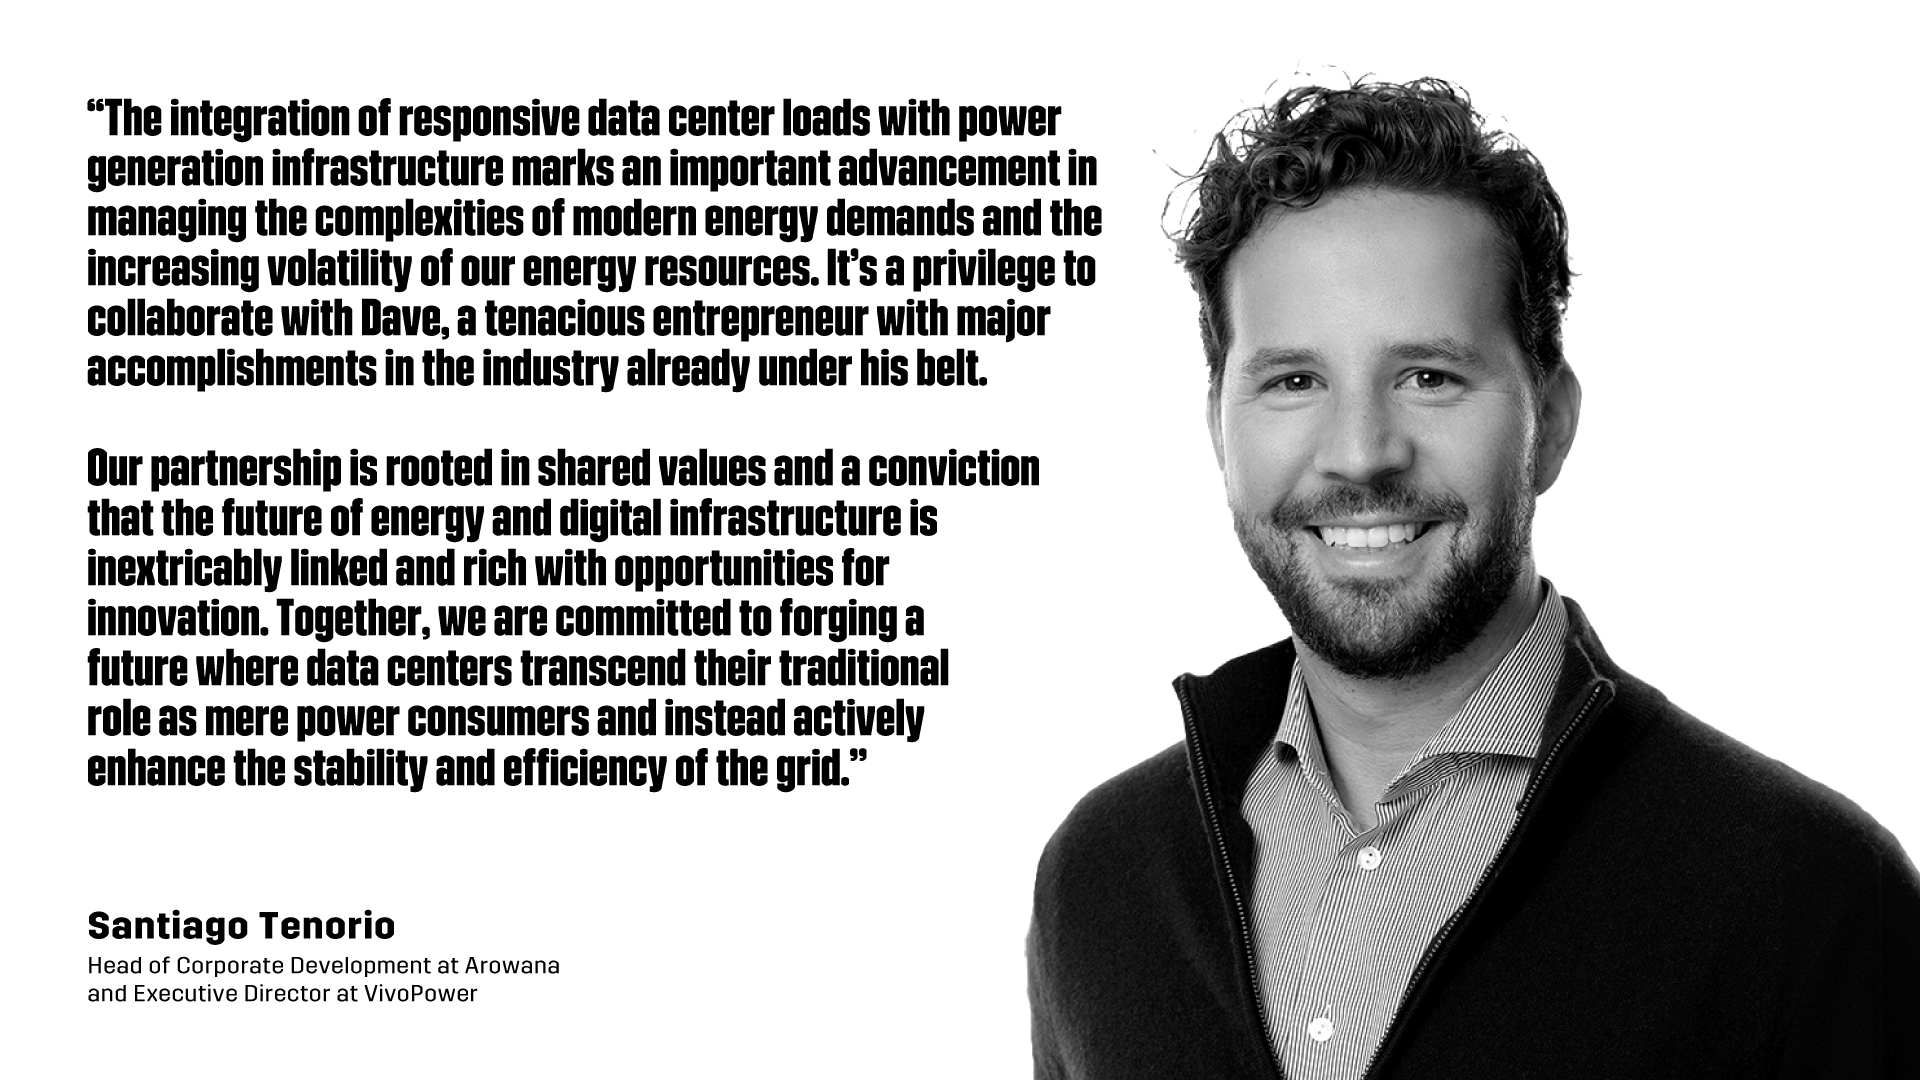 “The integration of responsive data center loads with power generation infrastructure marks an important advancement in managing the complexities of modern energy demands and the increasing volatility of our energy resources. It’s a privilege to collaborate with Dave, a tenacious entrepreneur with major accomplishments in the industry already under his belt.   Our partnership is rooted in shared values and a conviction that the future of energy and digital infrastructure is inextricably linked and rich with opportunities for innovation. Together, we are committed to forging a future where data centers transcend their traditional role as mere power consumers and instead actively enhance the stability and efficiency of the grid.” - Santiago Tenorio , Head of Corporate Development at Arowana  and Executive Director at VivoPower